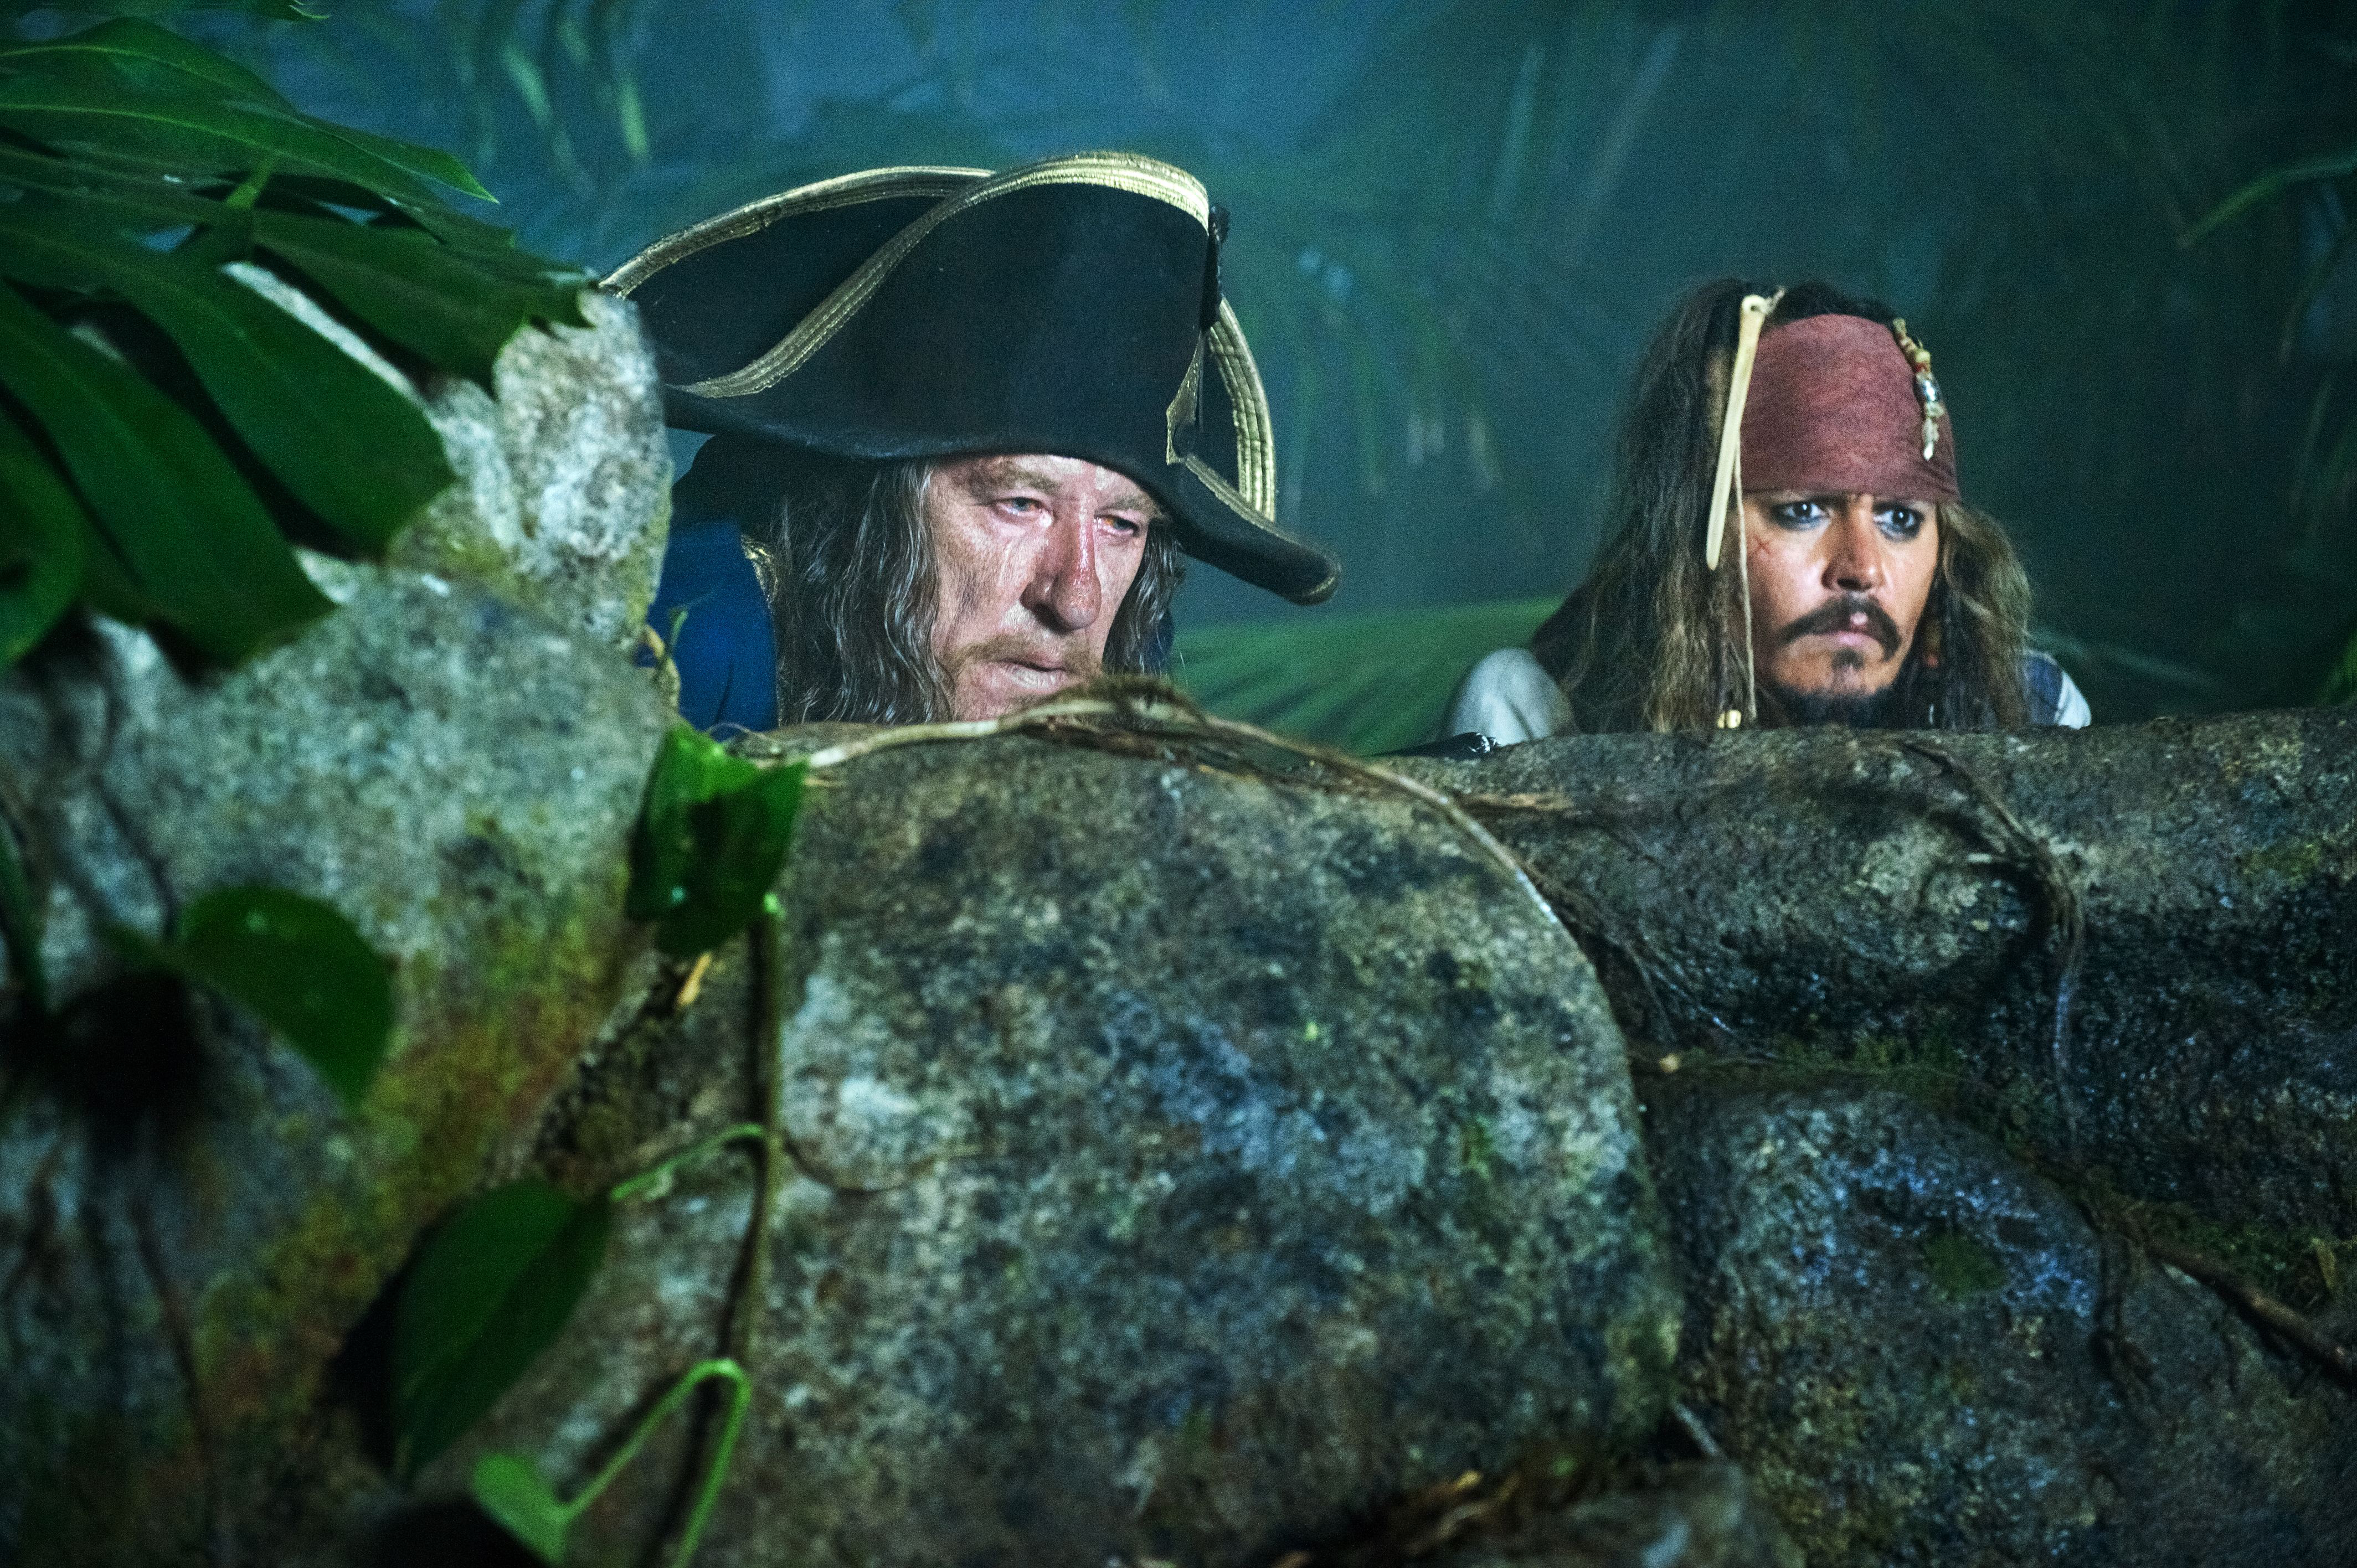 movie, pirates of the caribbean: on stranger tides, geoffrey rush, hector barbossa, jack sparrow, johnny depp, pirates of the caribbean